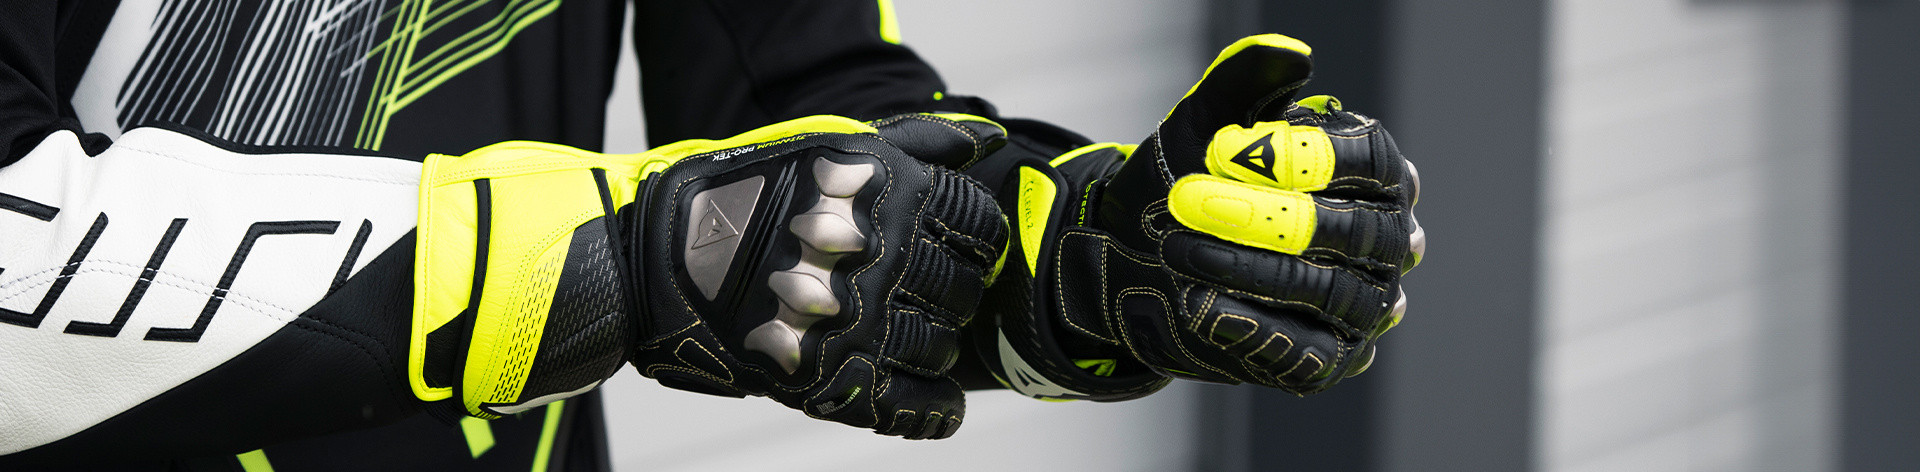 Motorcycle Gloves - Official Dainese Shop